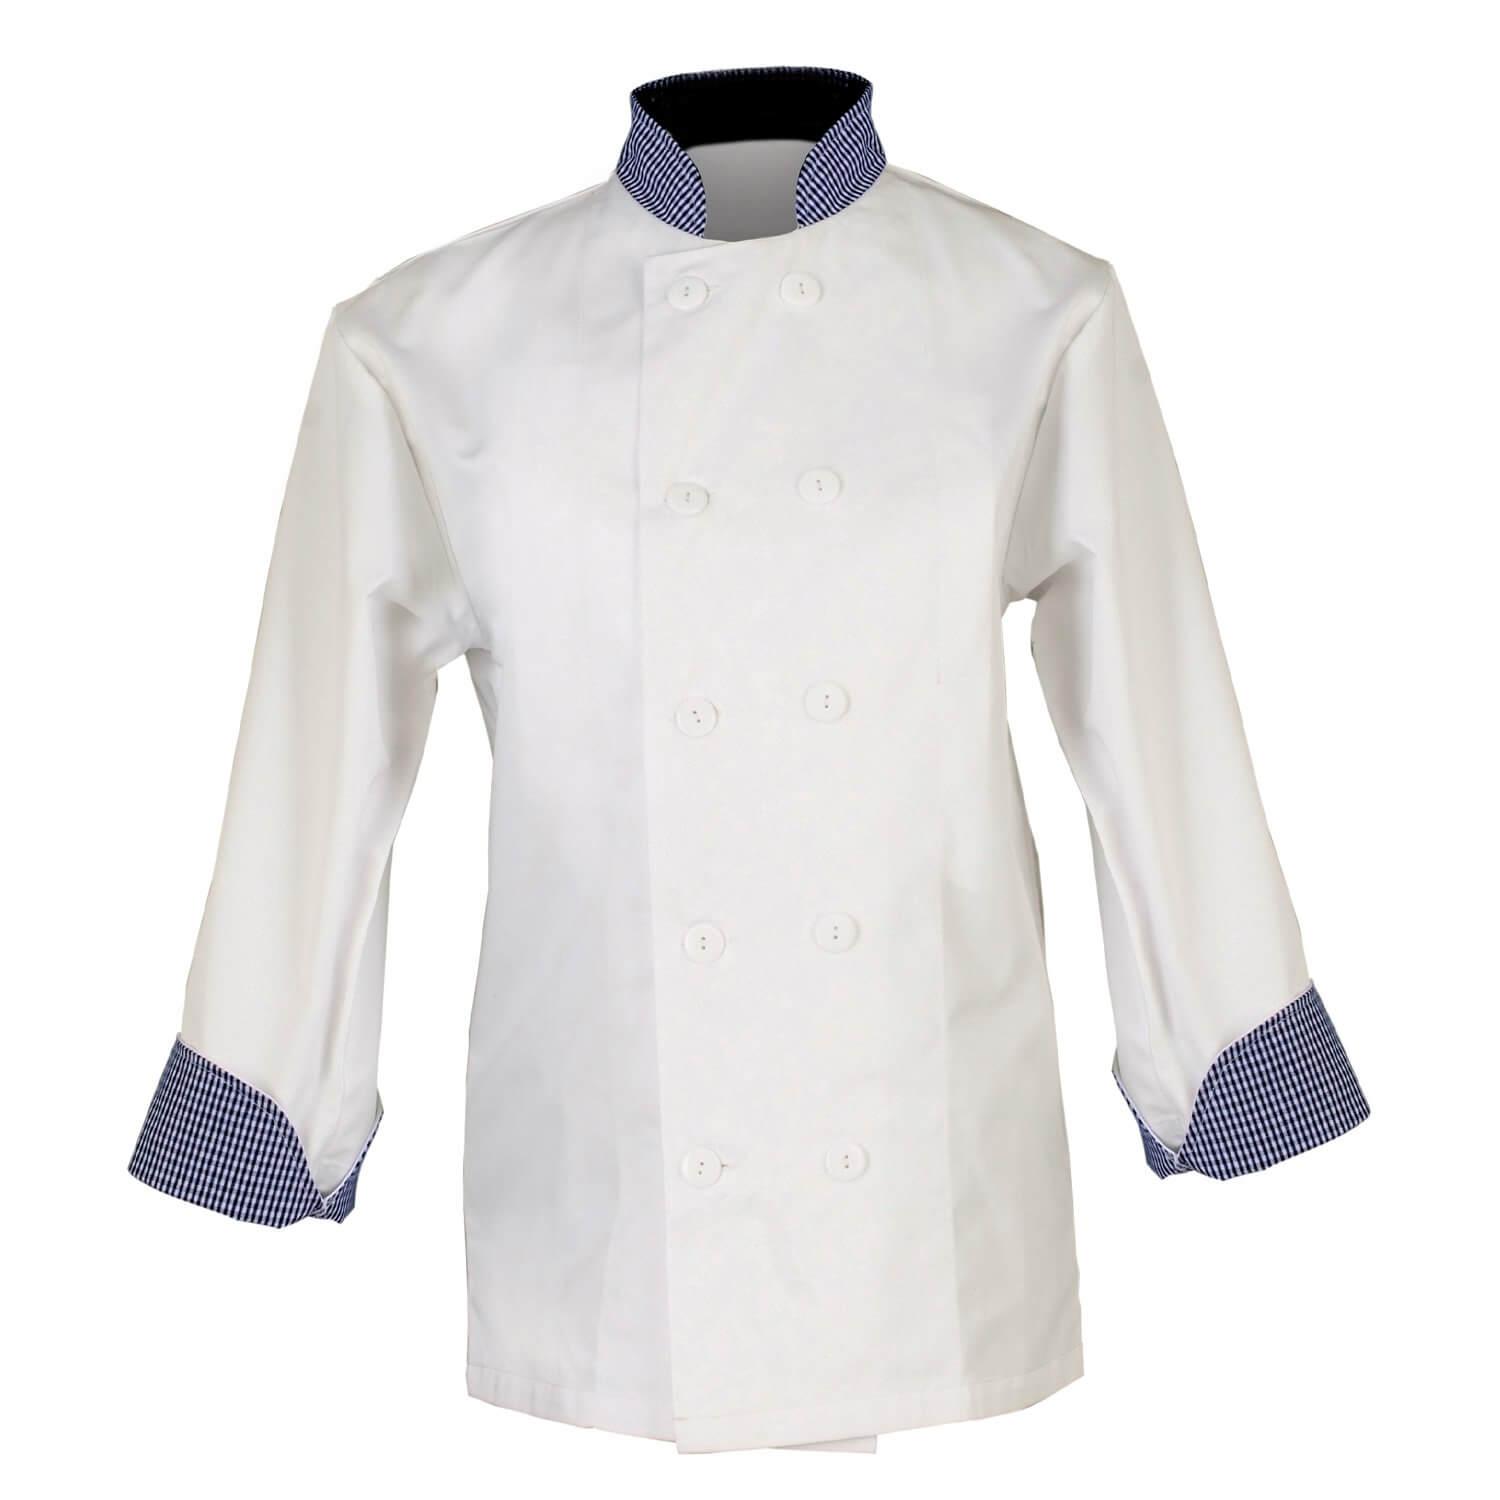 Pegasus Chefwear Chefs Jacket with Blue White Gingham Collar and Cuffs